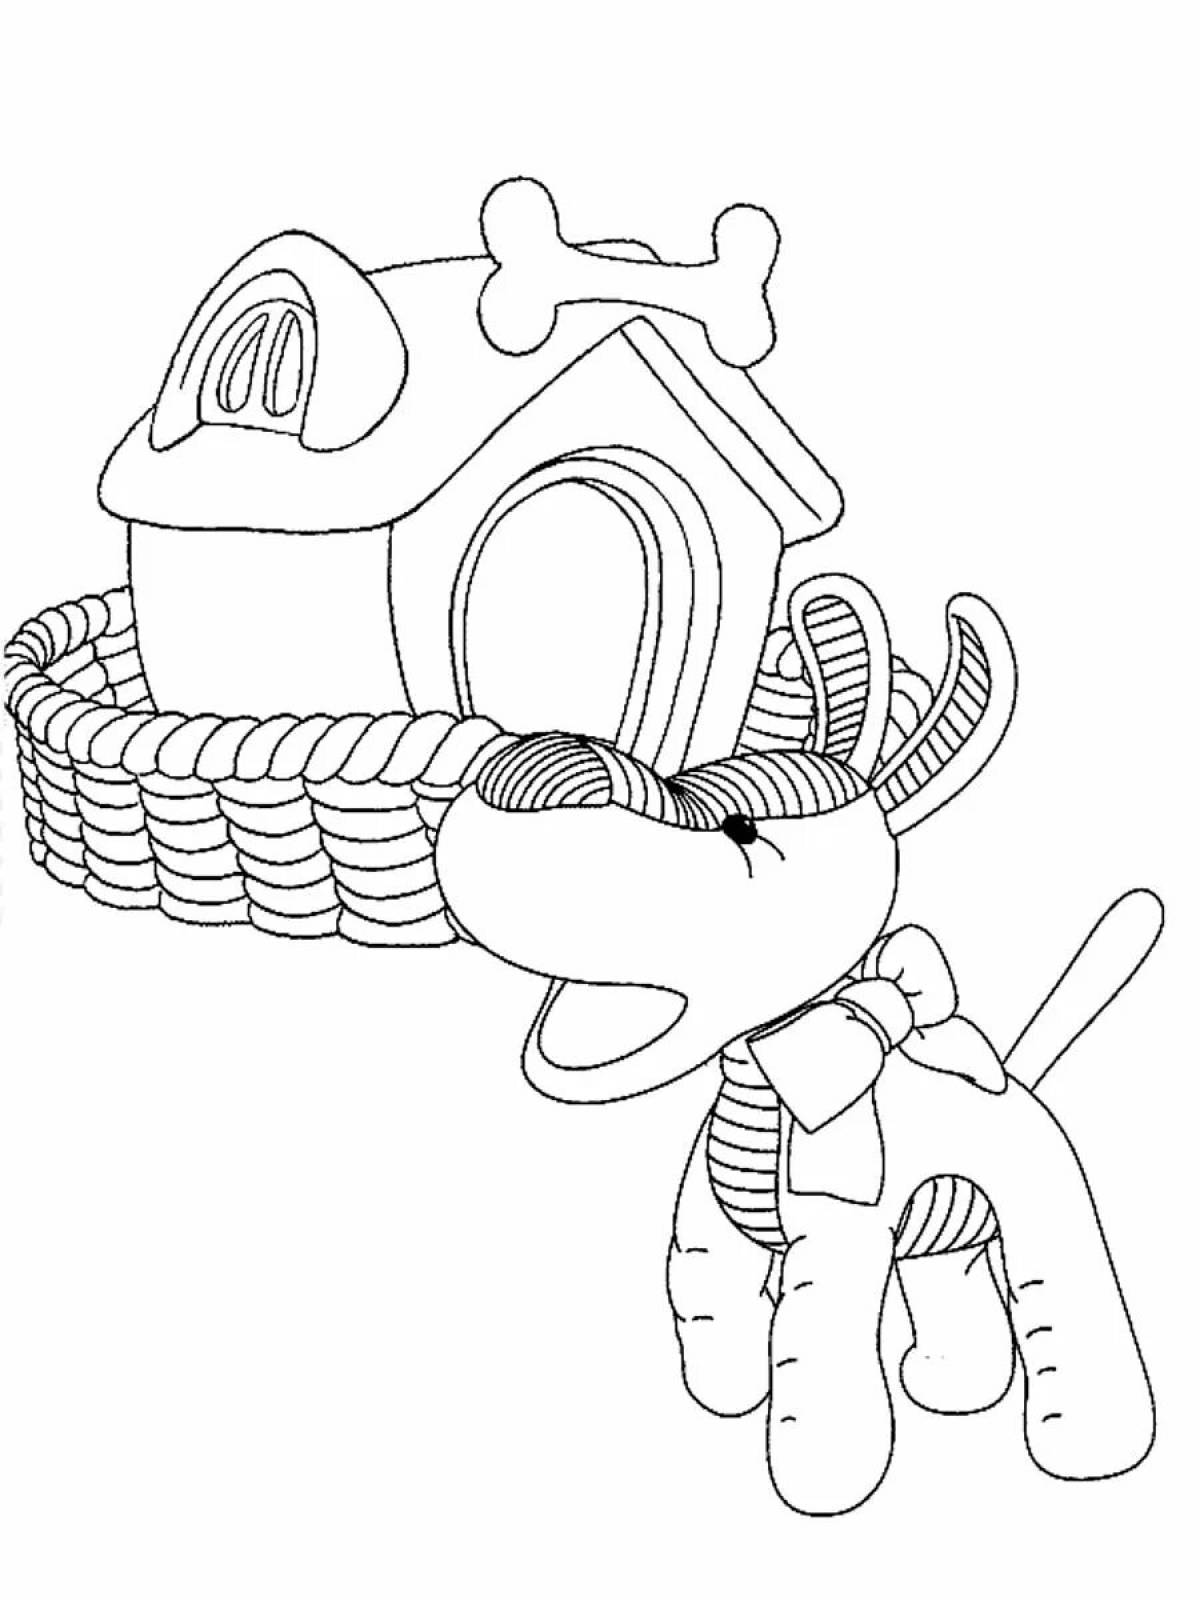 Colorful playful andy coloring book